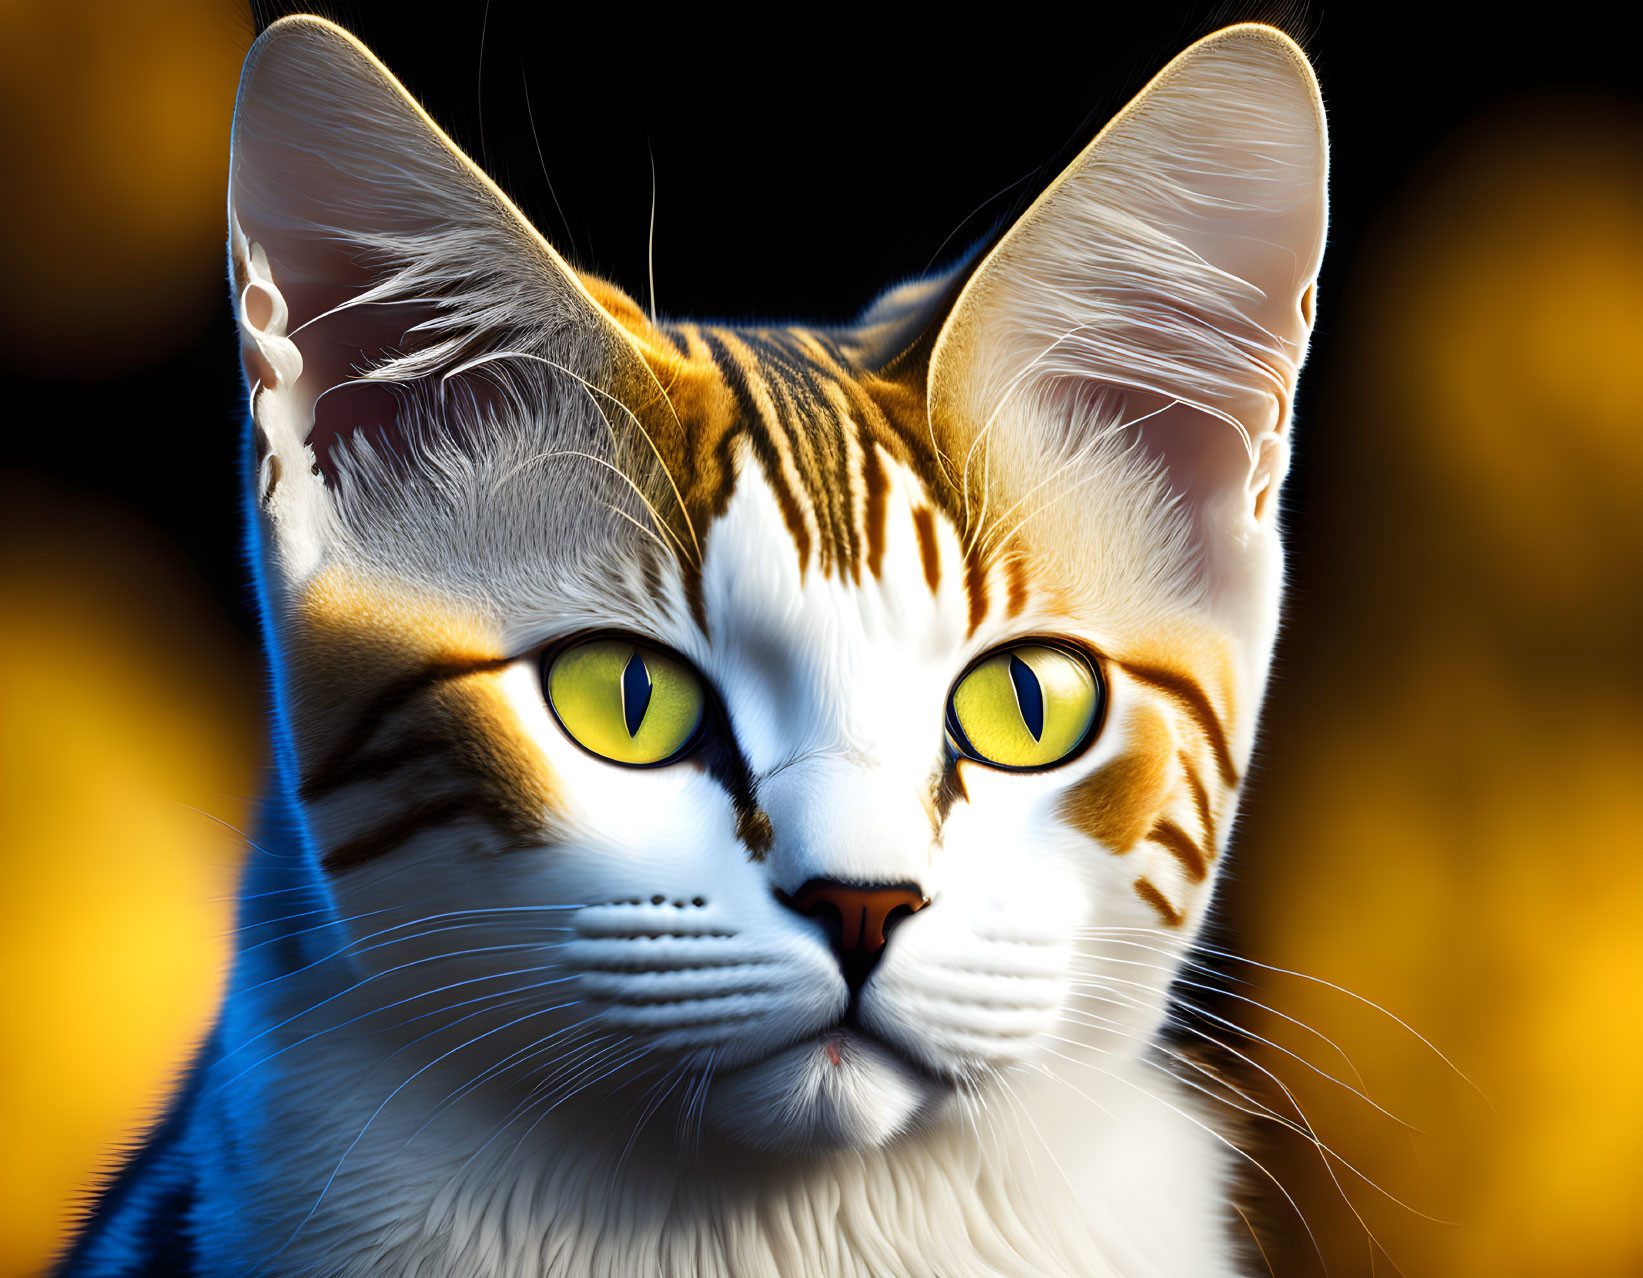 Detailed Close-Up of Vividly Illustrated Cat with Striking Yellow Eyes and Striped Fur